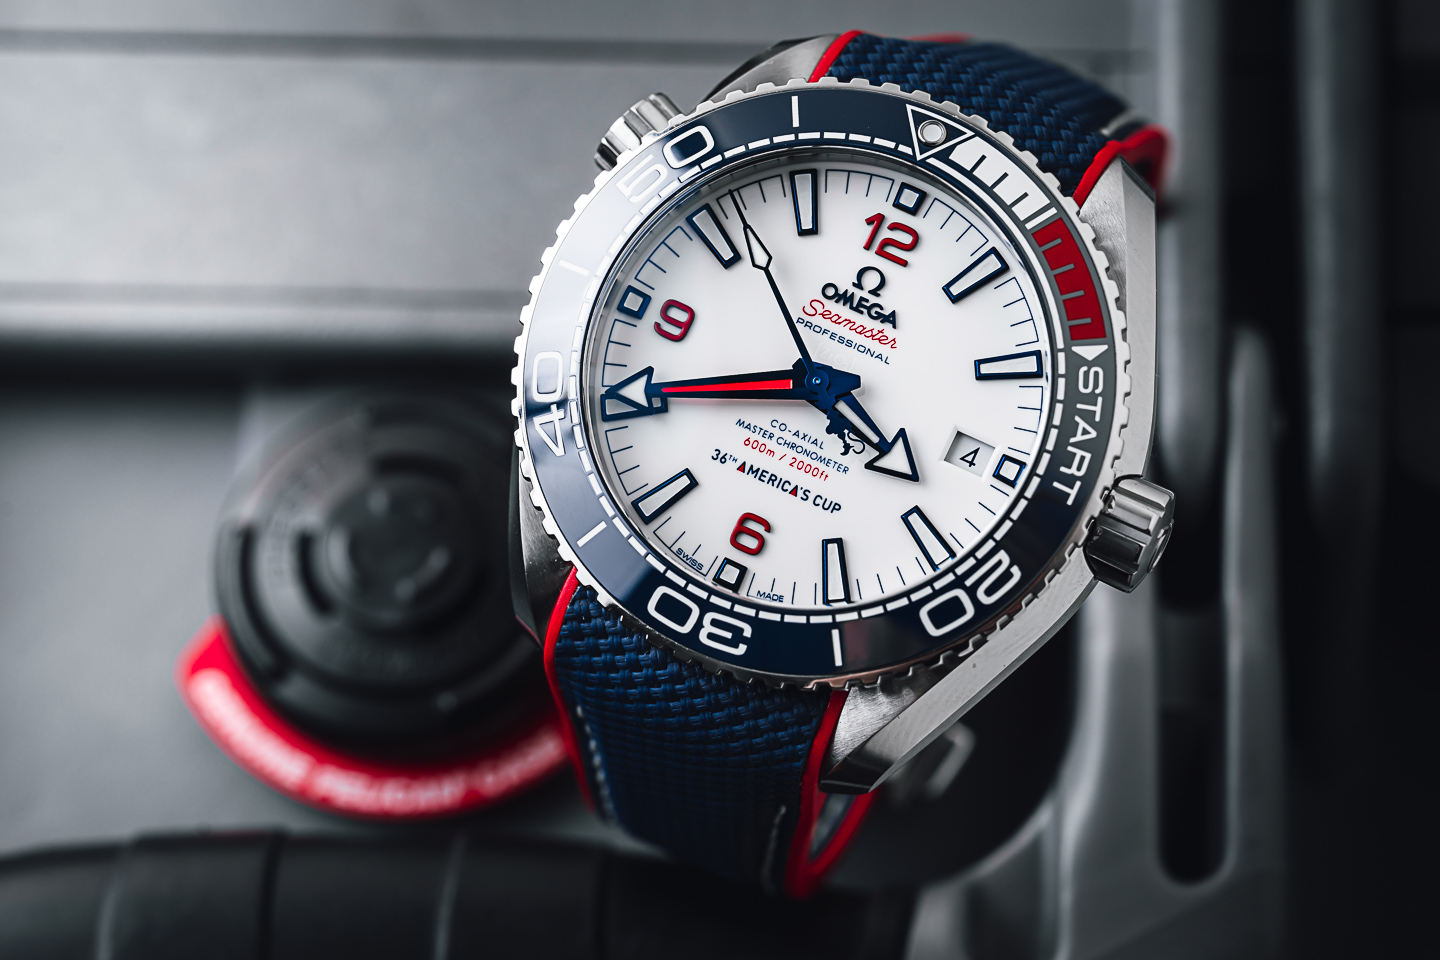 Hands-On With The Omega Seamaster Planet Ocean For The 36th America's Cup | aBlogtoWatch